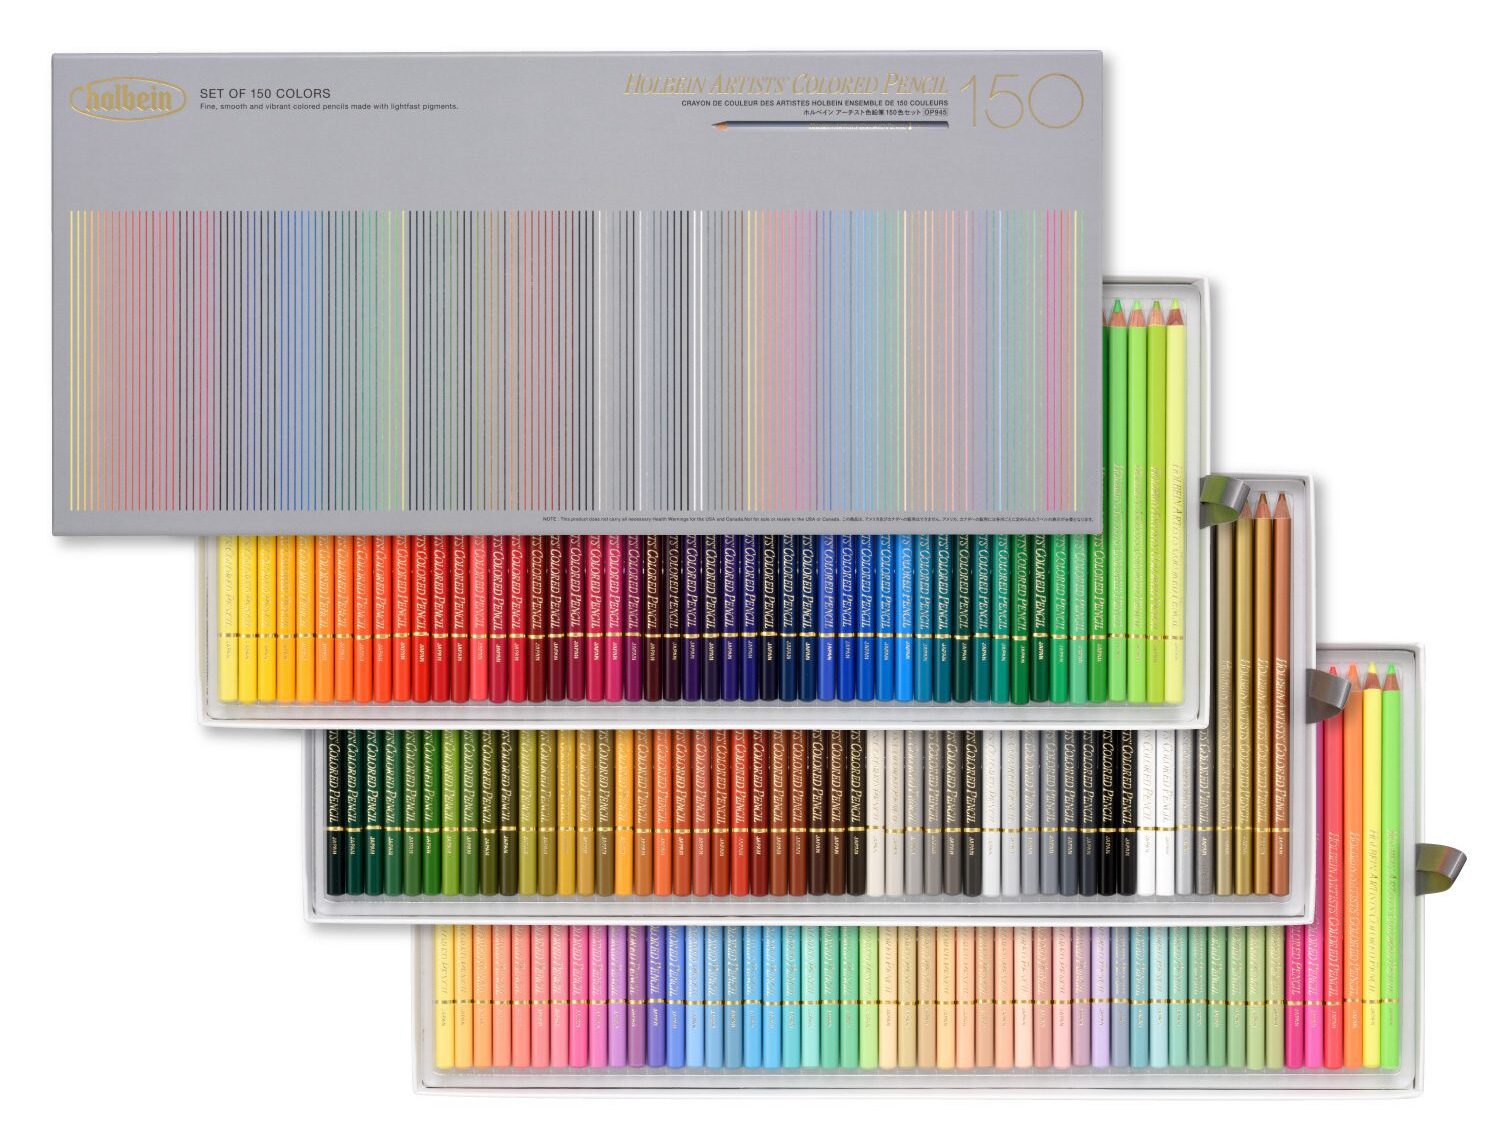 What are the Best Colored Pencils for Artists?